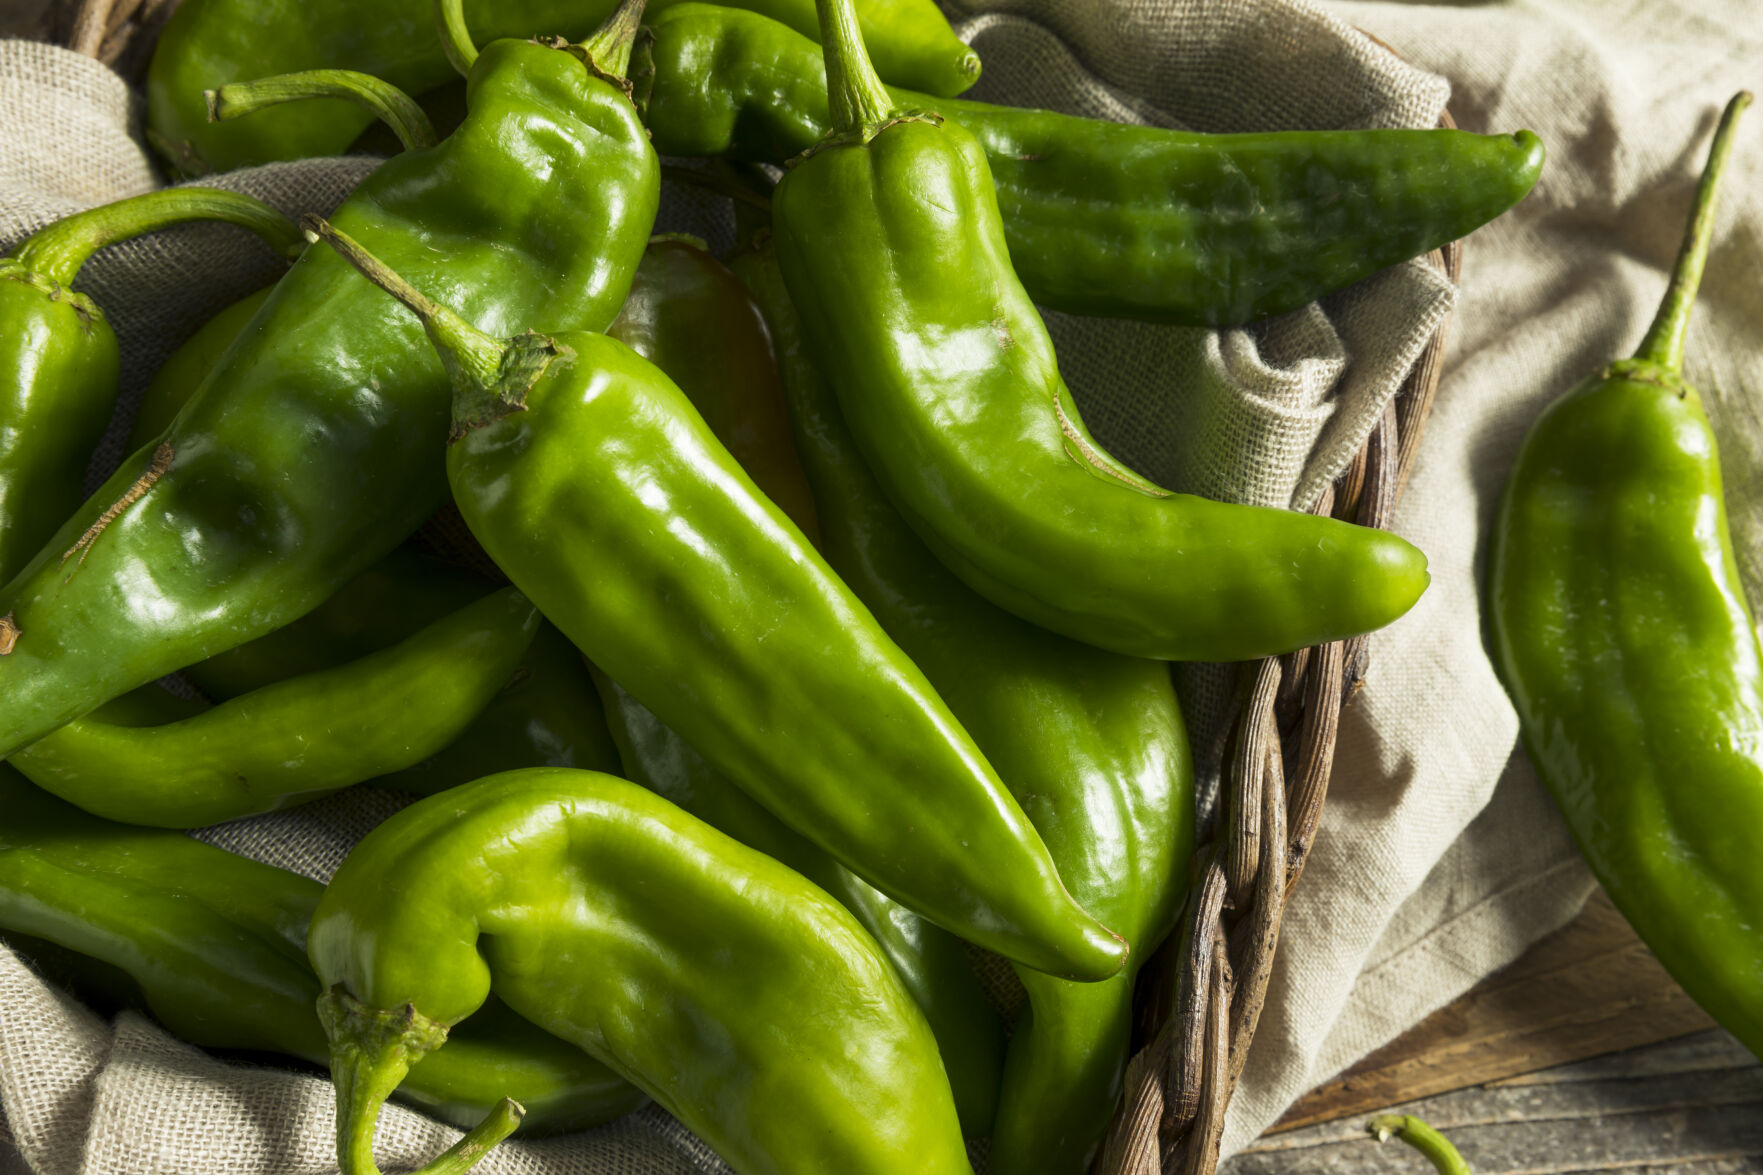 After nearly 4 decades, farmer gives up growing chile amid worker shortage Local News elpasoinc